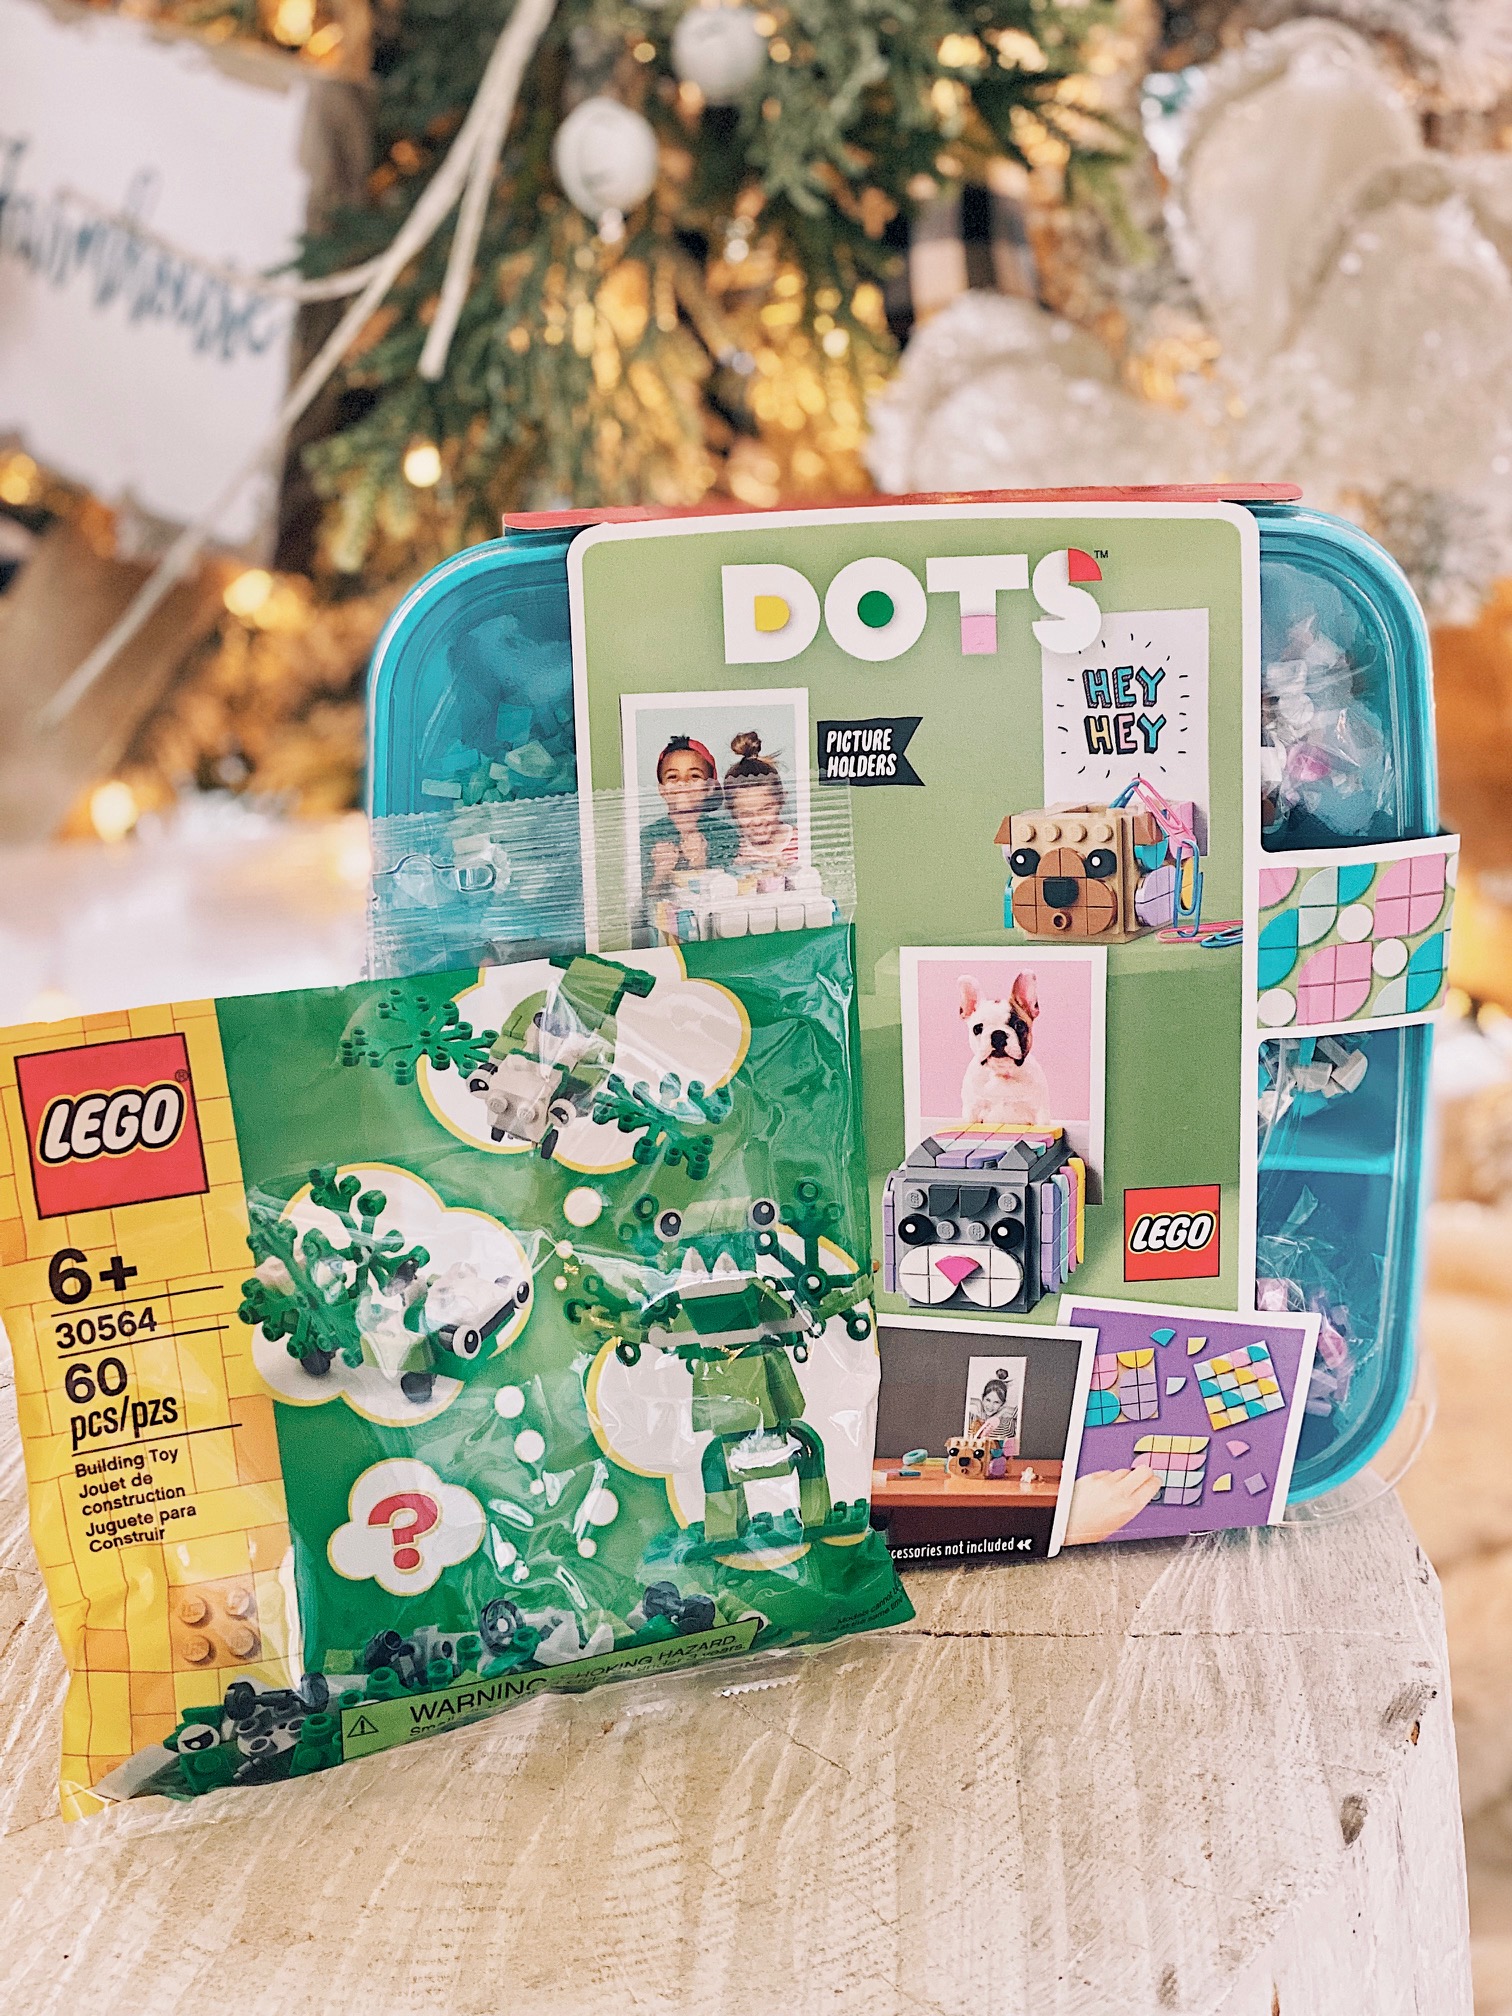 10 DIY Stocking Stuffer Ideas for the Whole Family featured by top AL family blogger, She Gave It A Go